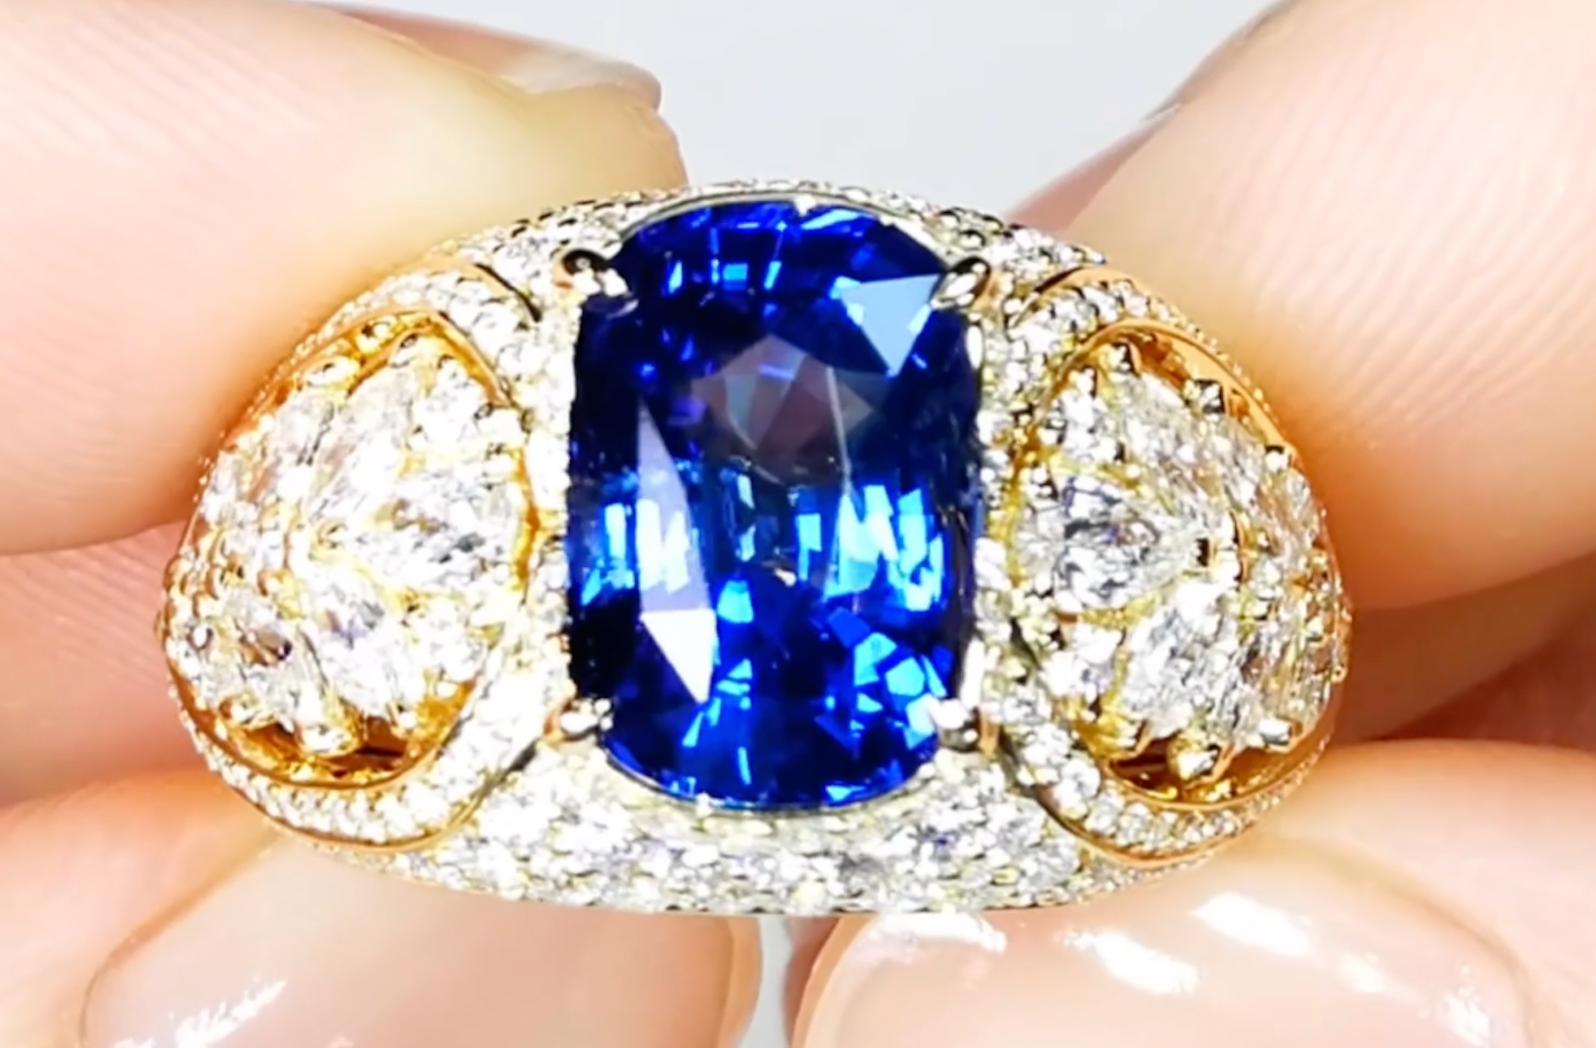 5.13ct Unheated Ceylon Royal Blue Sapphire Ring with D Flawless Diamonds set in 18K Yellow Gold